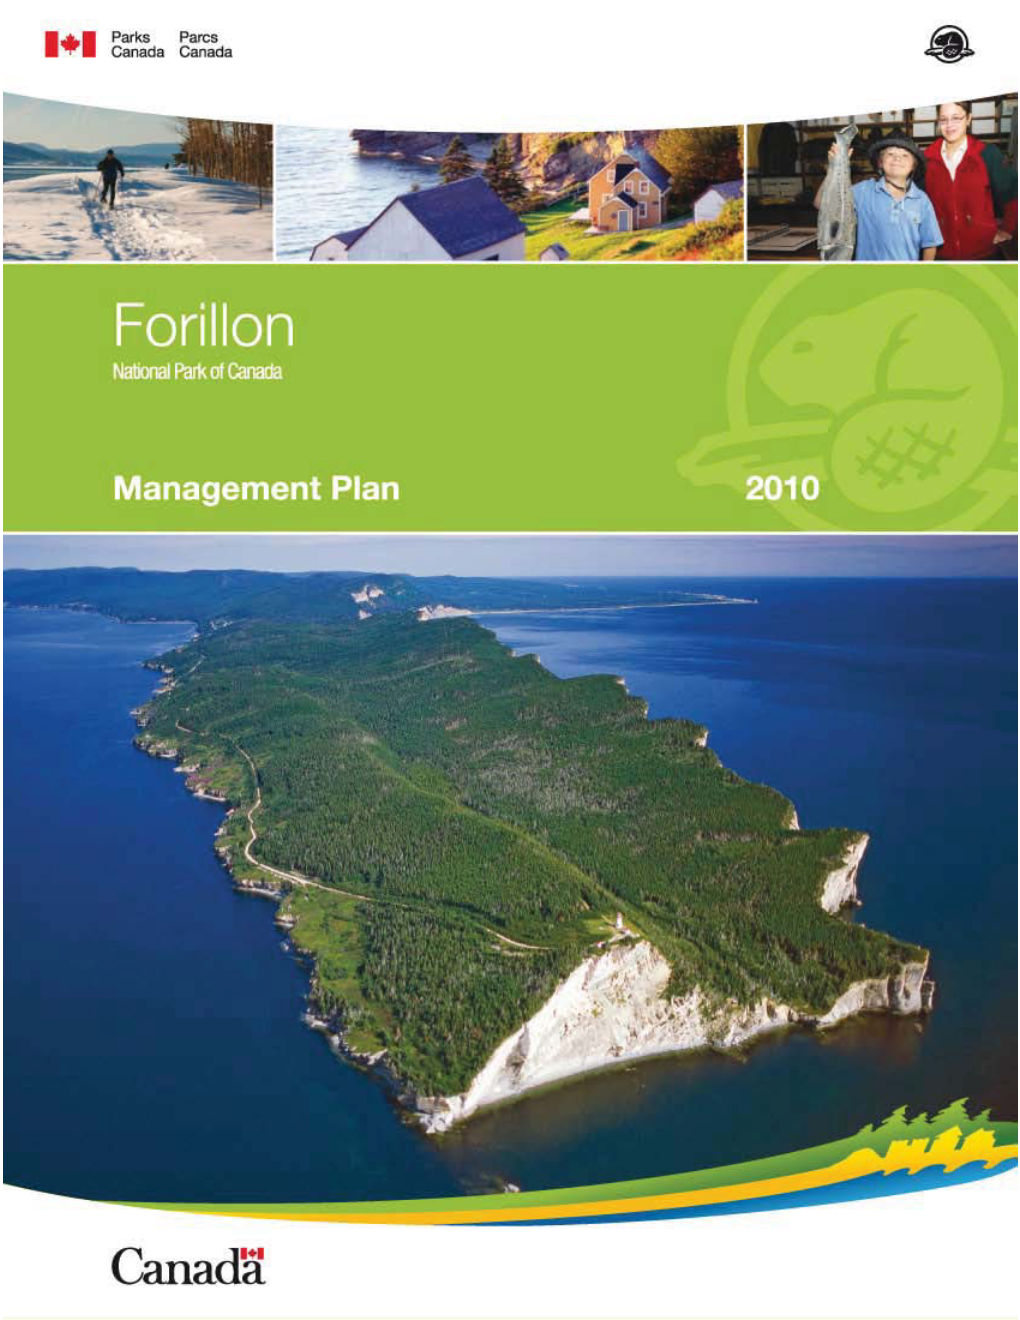 Forillon National Park of Canada Management Plan